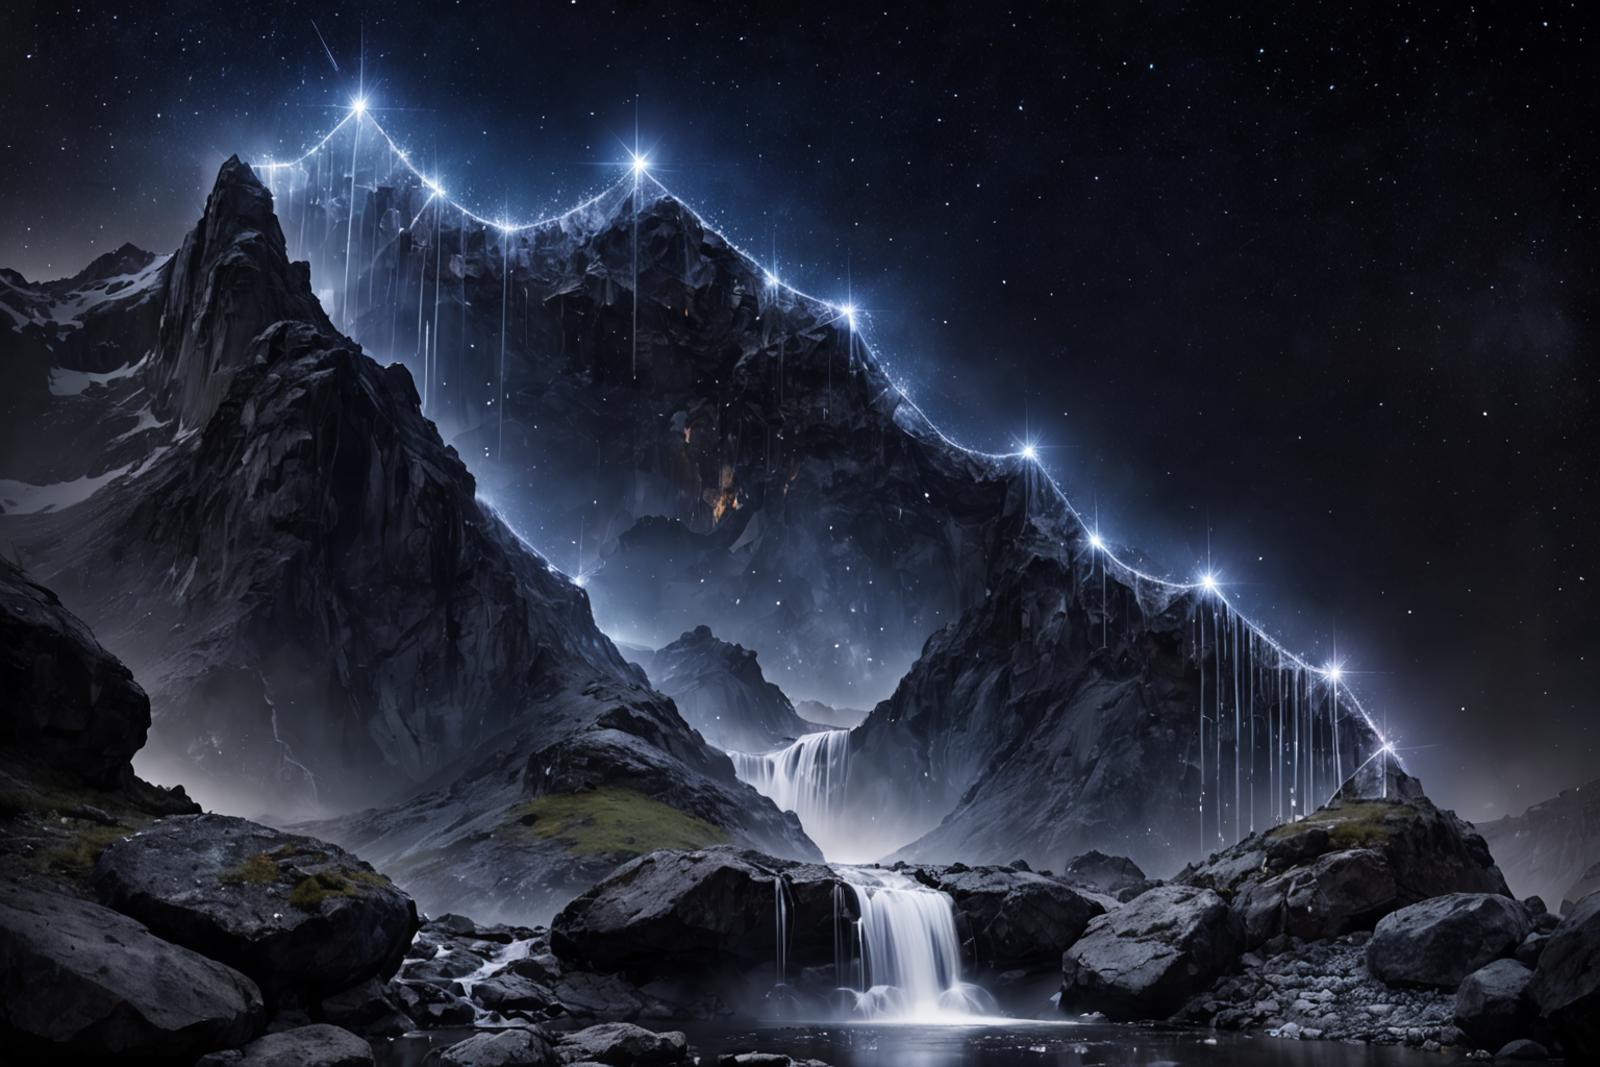 A majestic waterfall cascades down a mountain at night, illuminated by the stars.